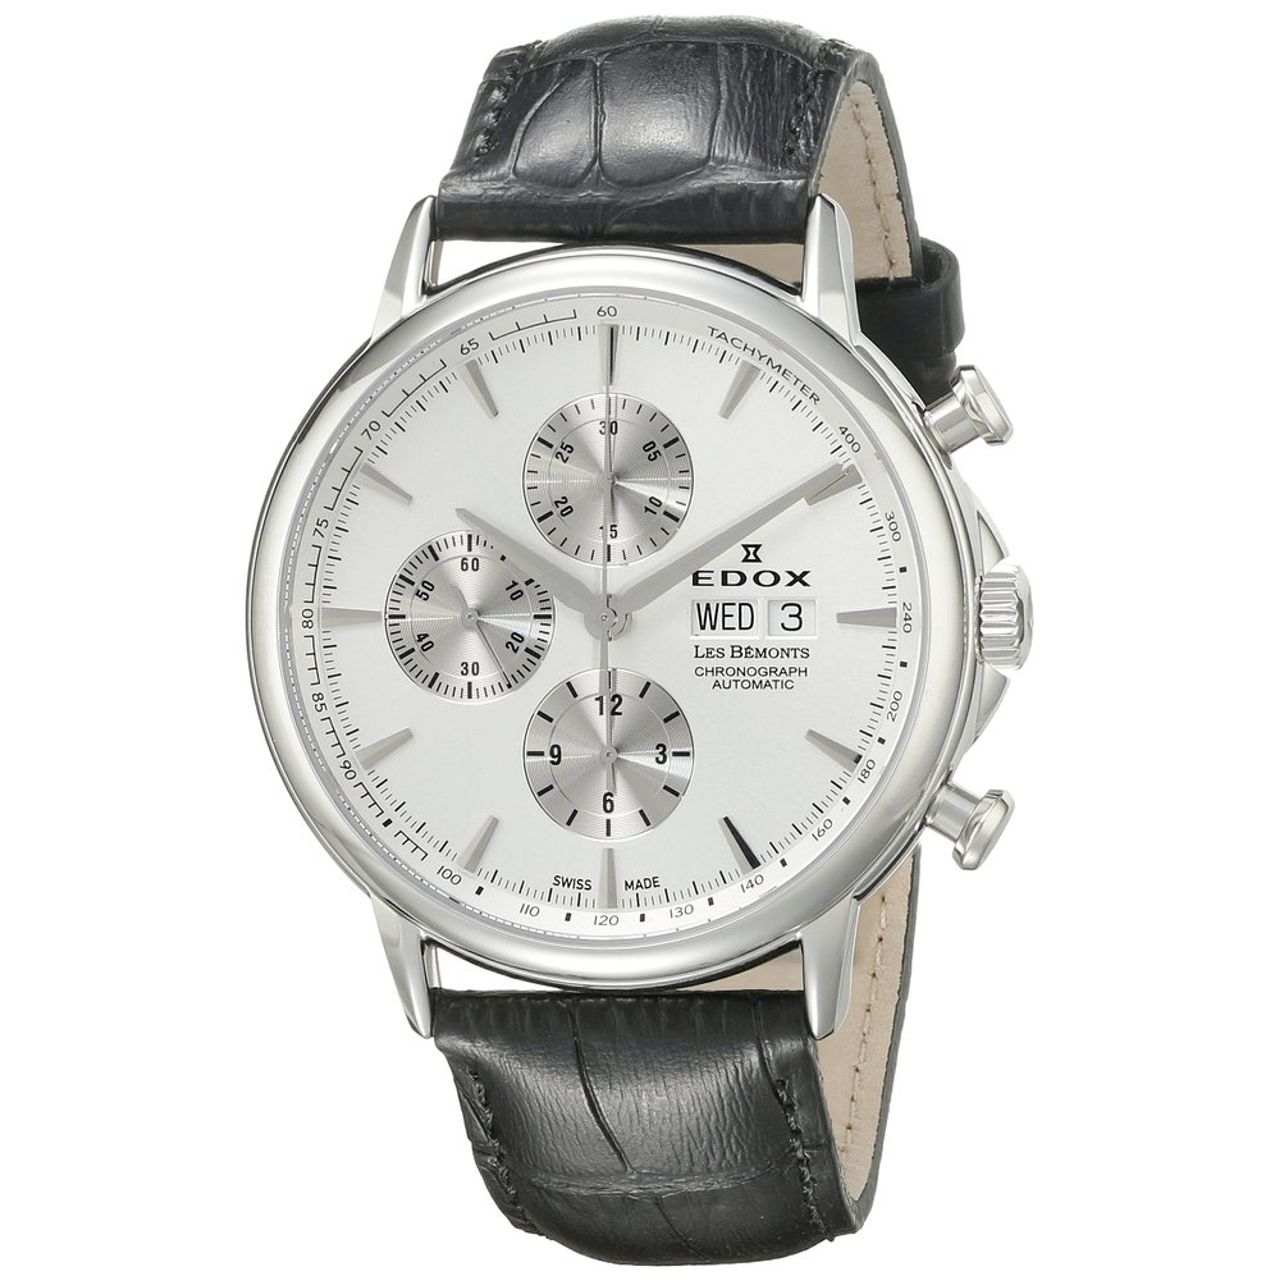 Edox 01120 3 AIN Mens Silver Dial Analog Automatic Watch with Leather Strap